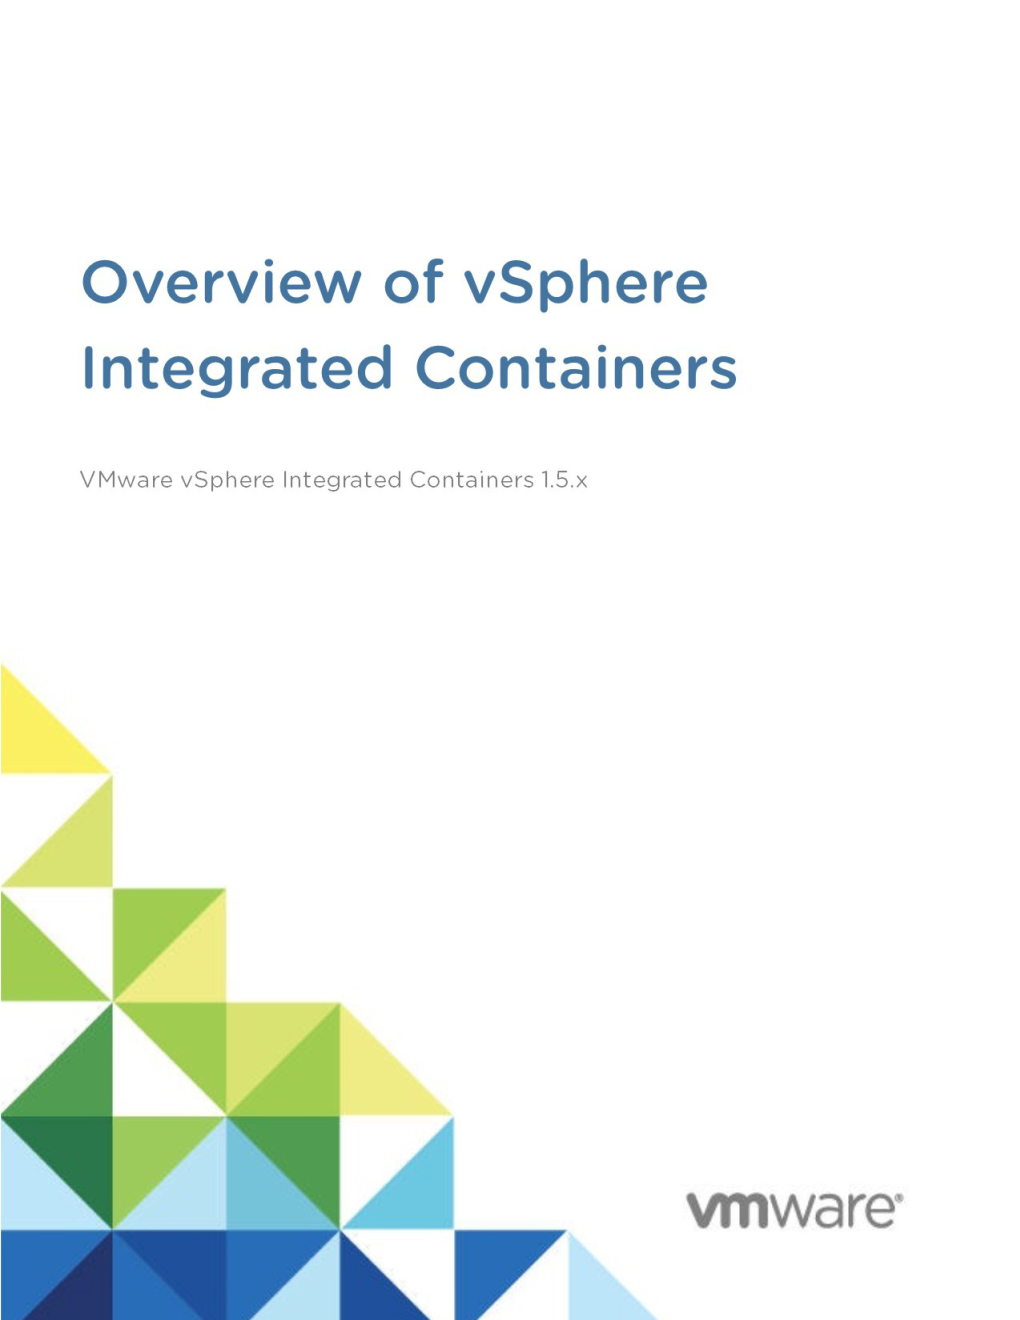 Vmware Vsphere Integrated Containers 1.5 Overview